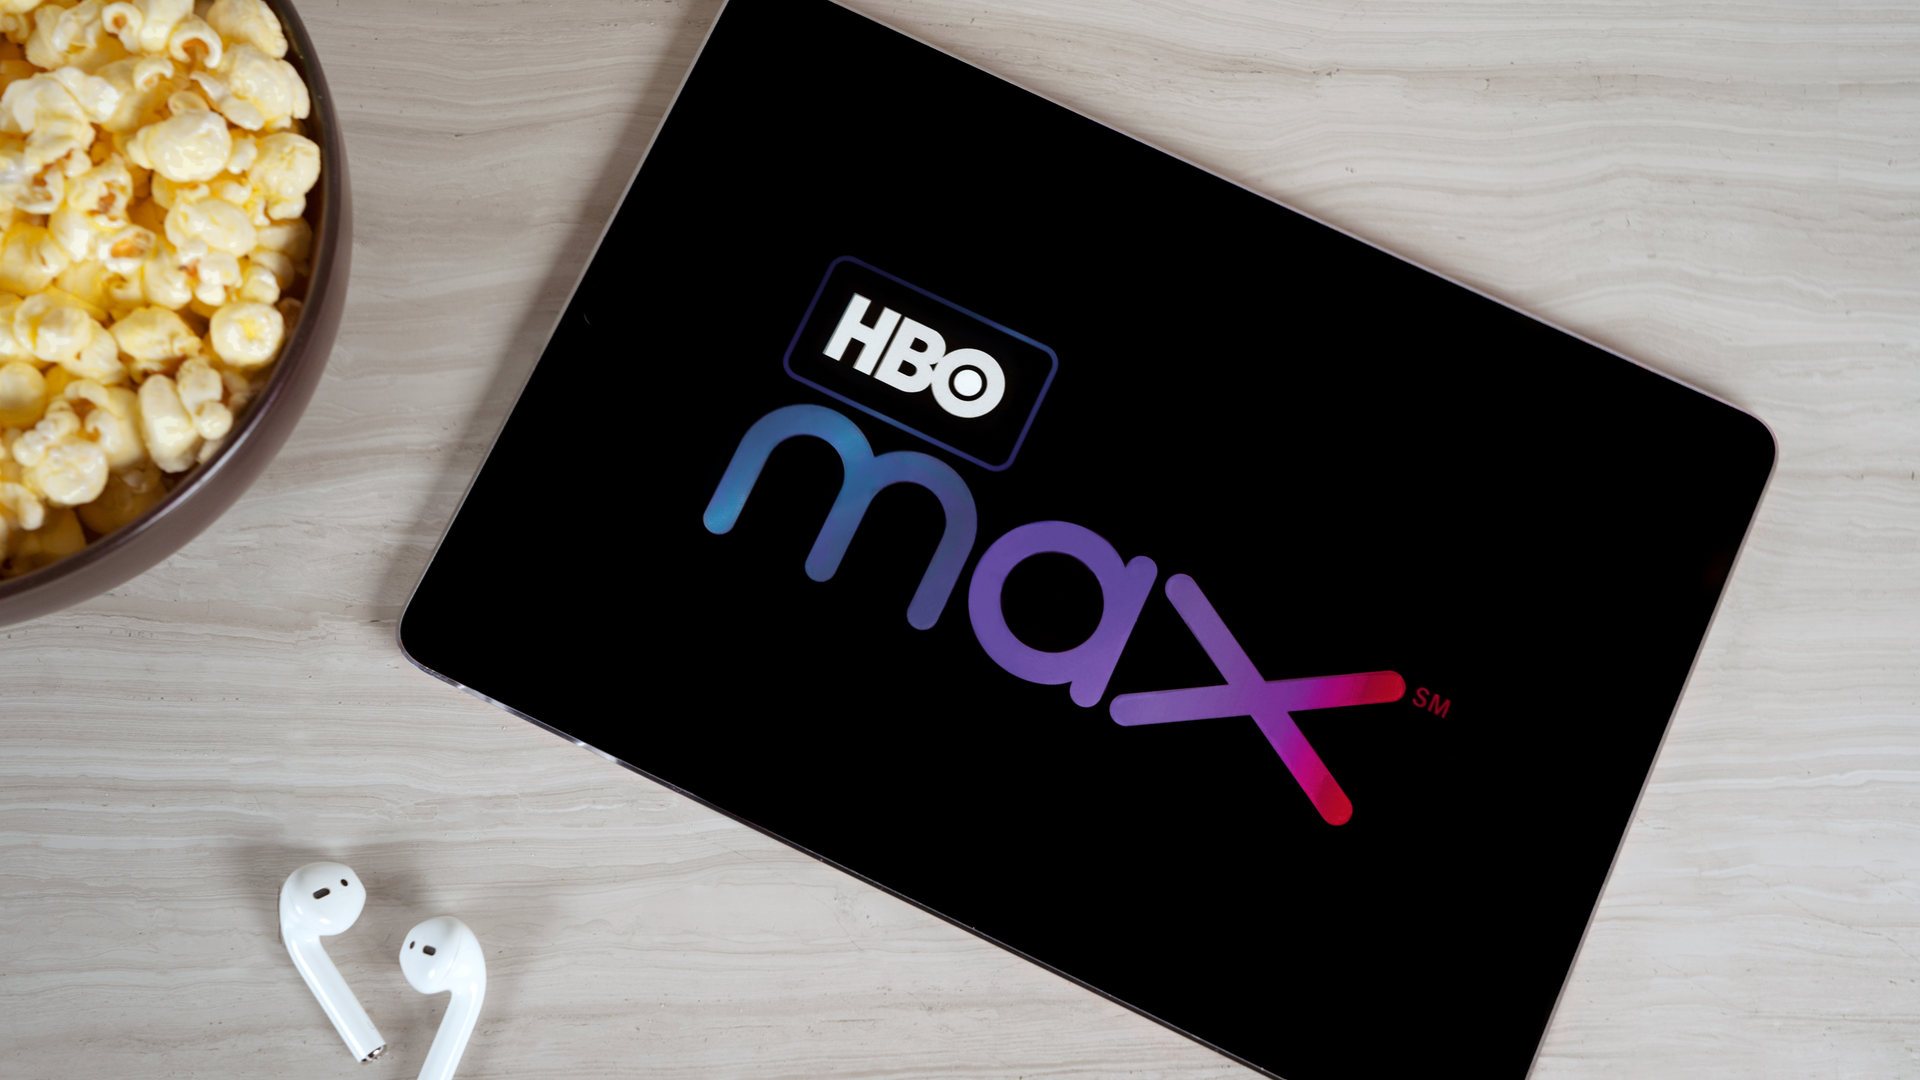 HBO Max displayed on a tablet next to a pair of AirPods and a bowl of popcorn